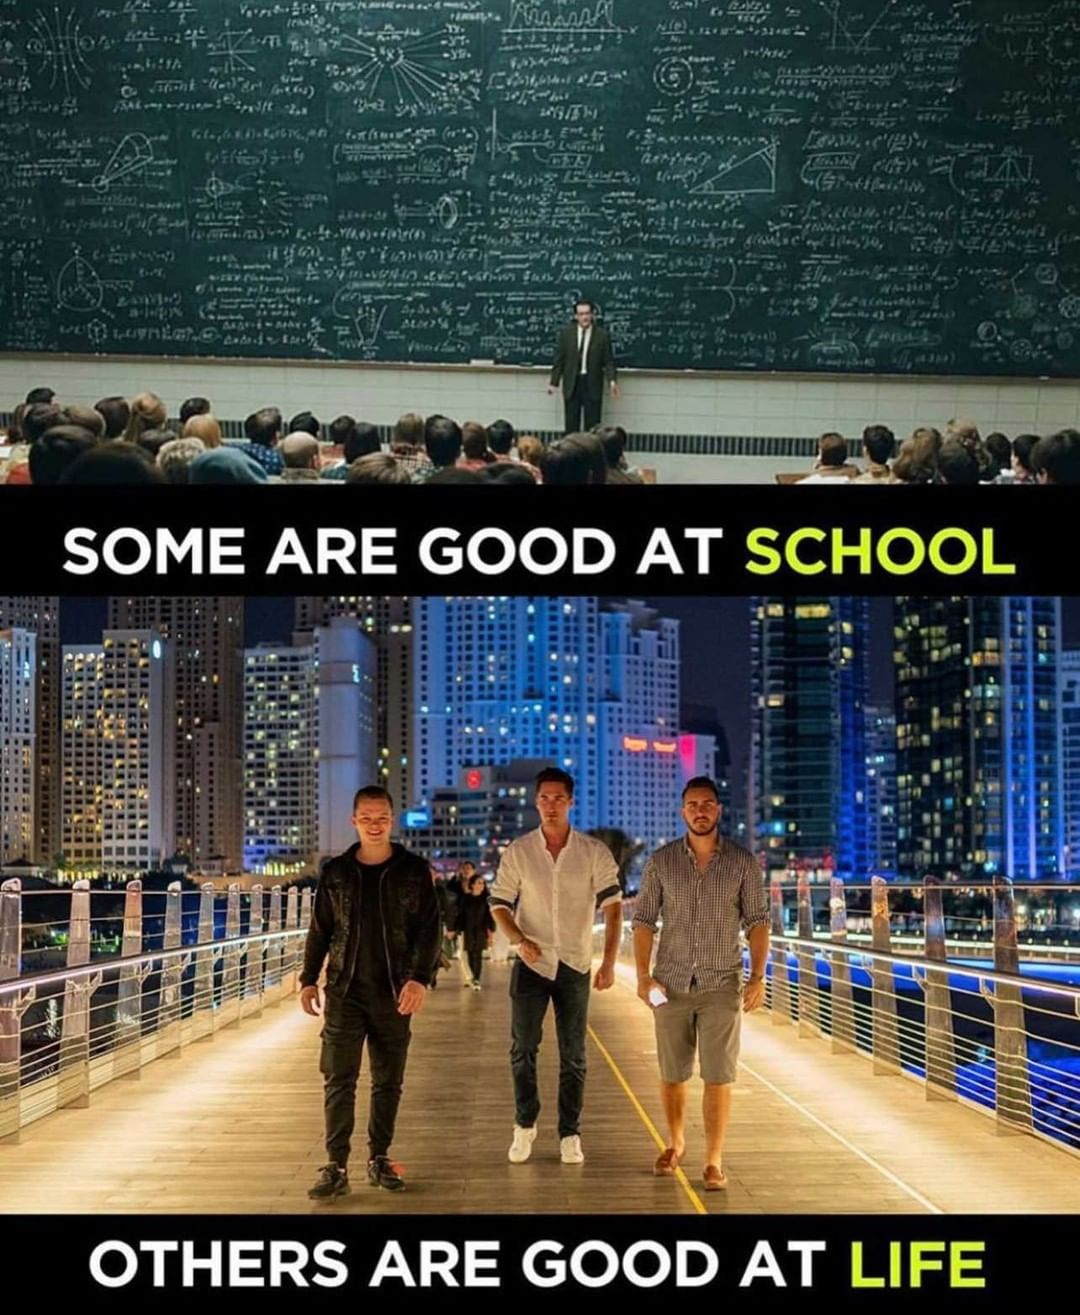 Some are good at school others are good at life.